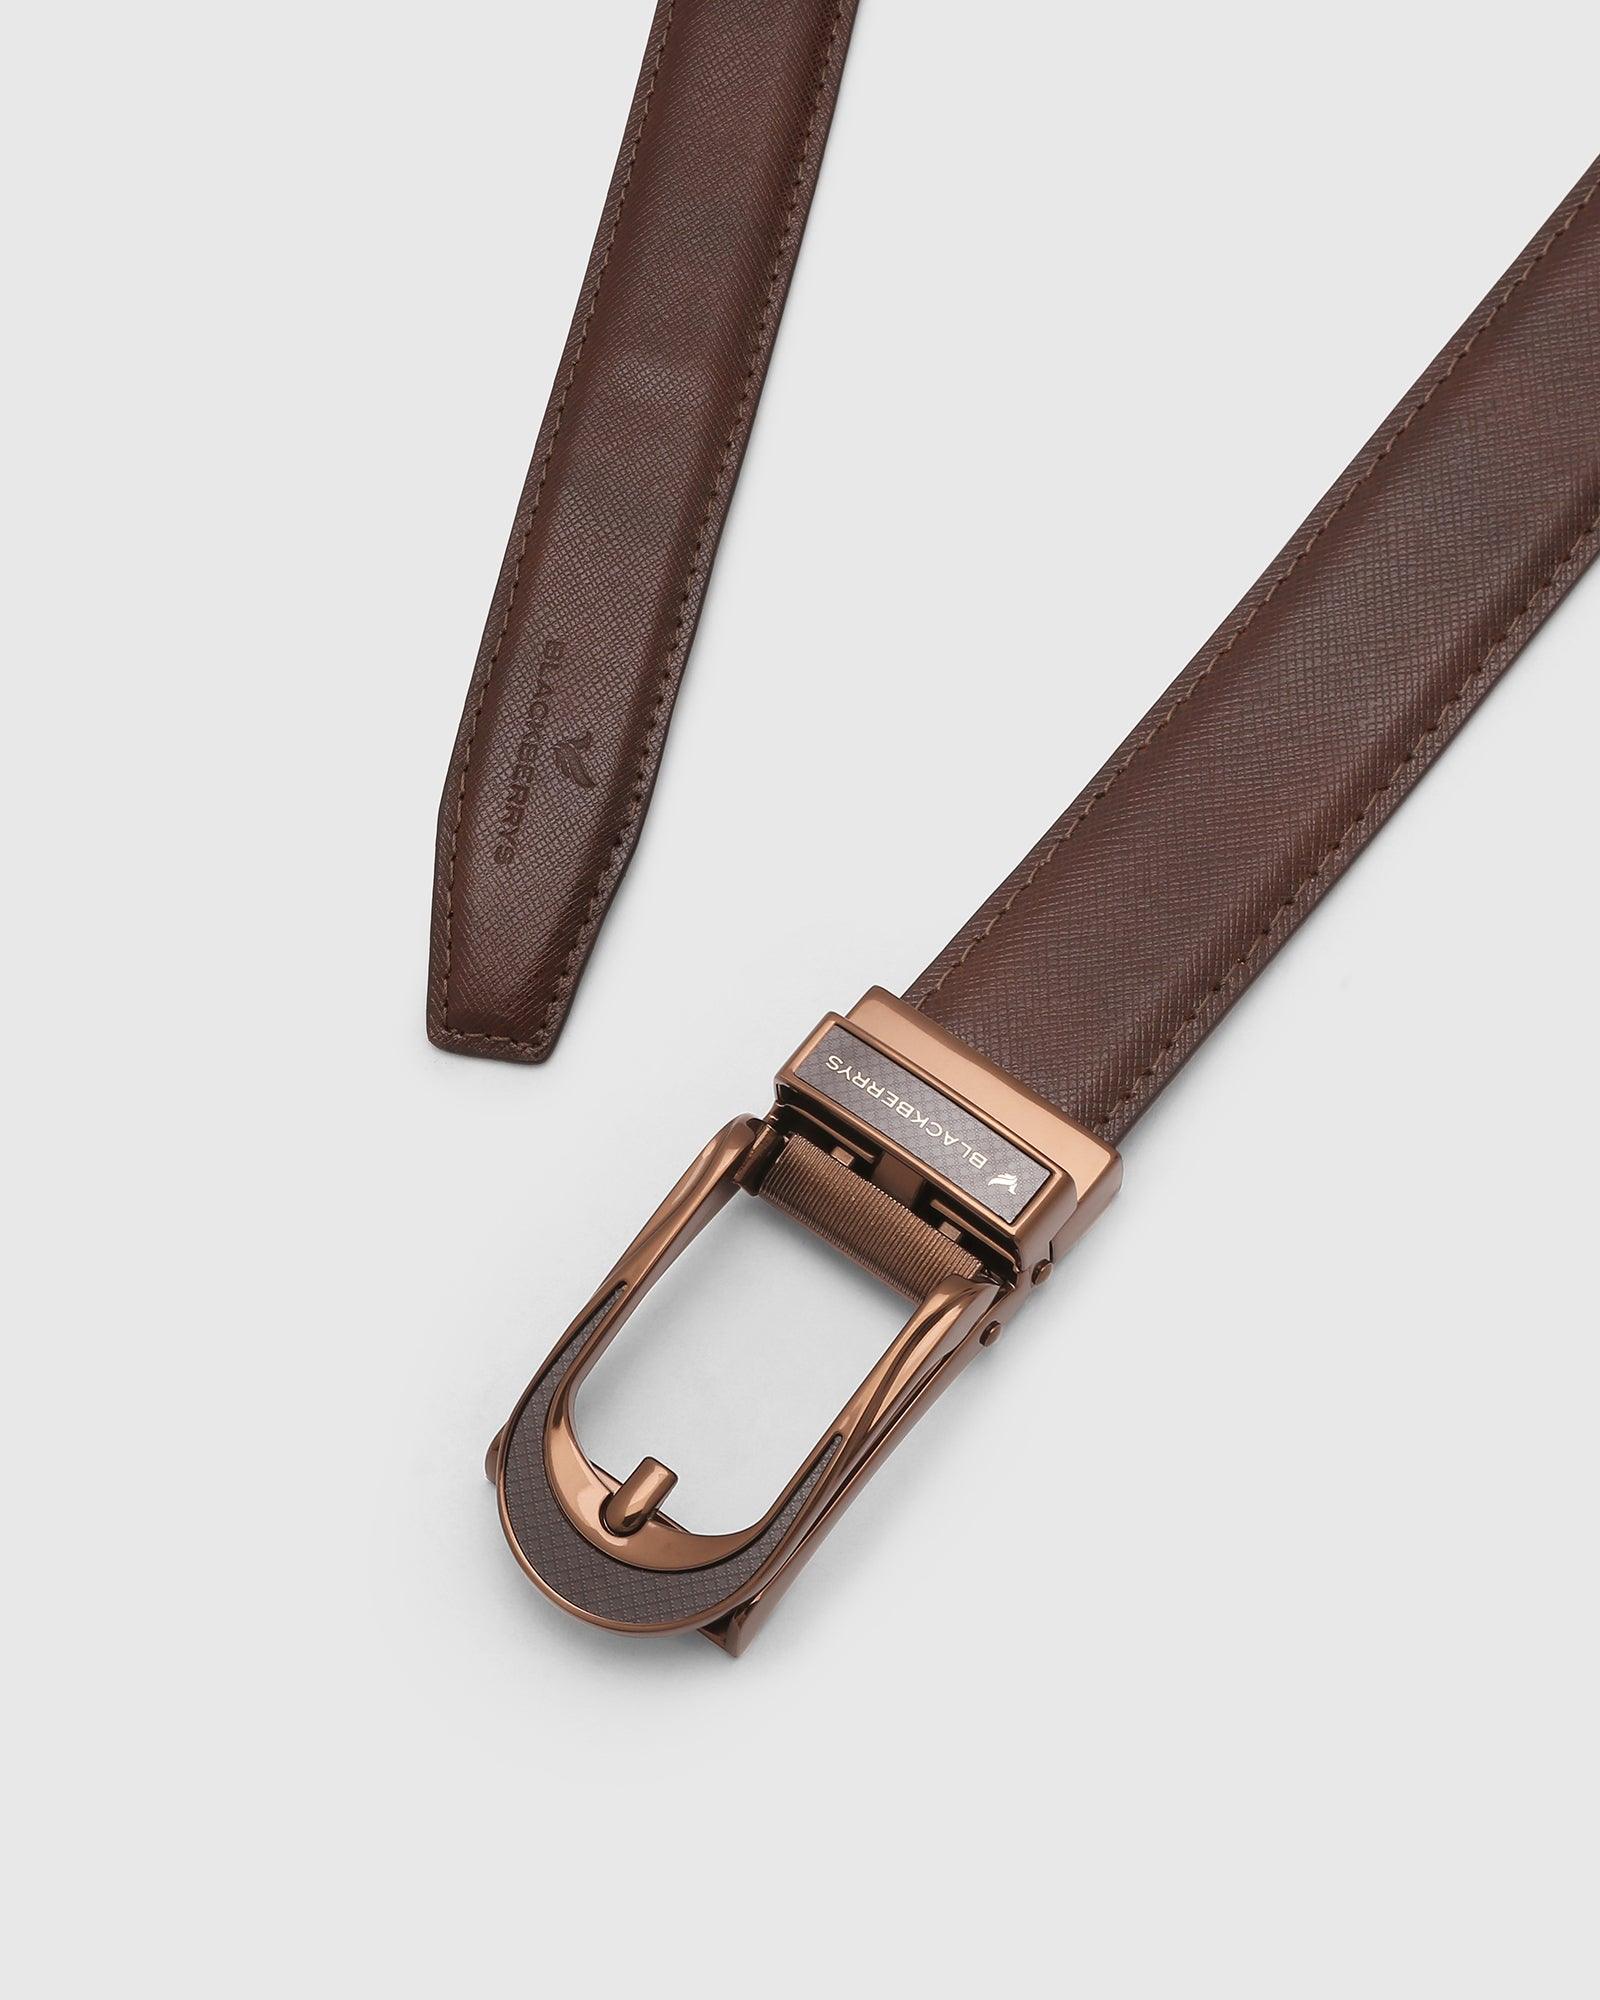 Must Haves Leather Brown Textured Belt - New Galenia